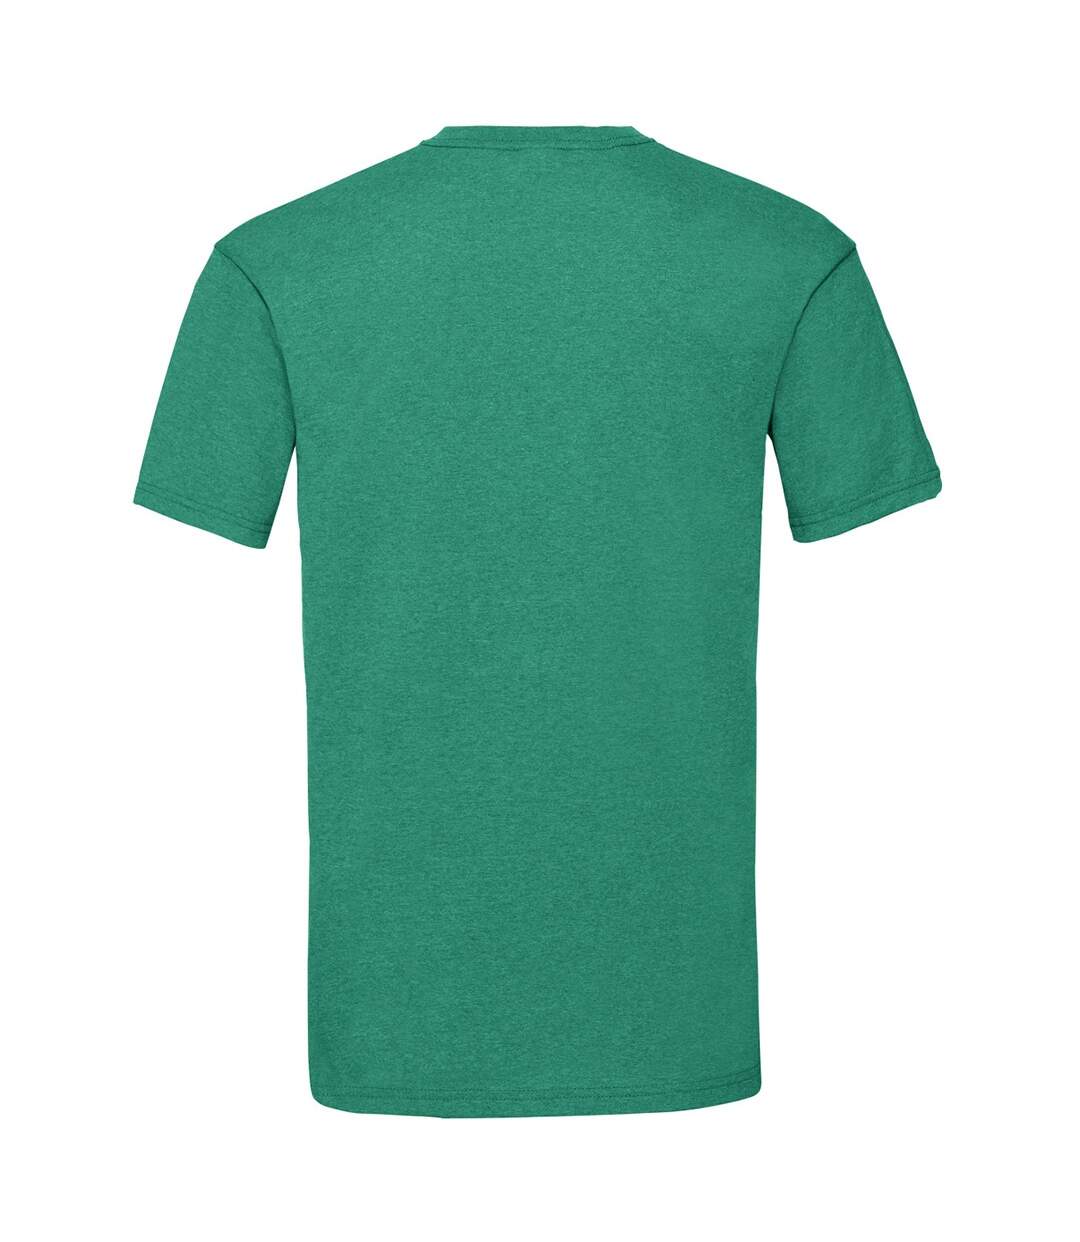 Fruit Of The Loom - T-shirt manches courtes - Homme (Vert chiné) - UTBC330